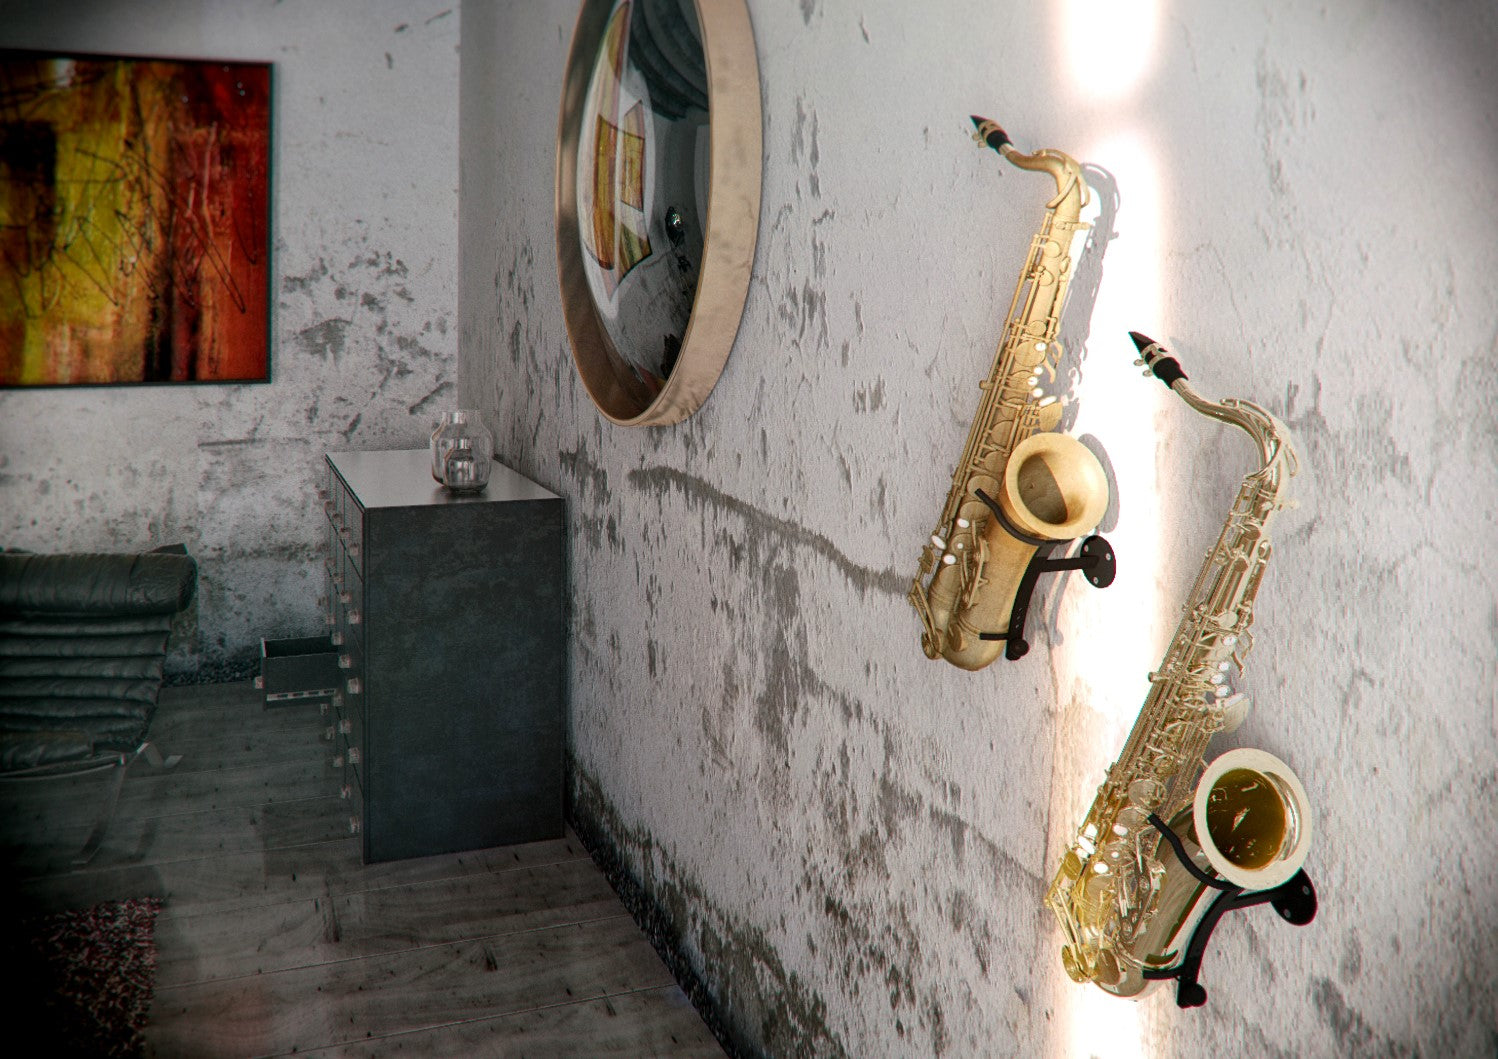 set of saxophones in stands mounted on the wall in a loft apartment